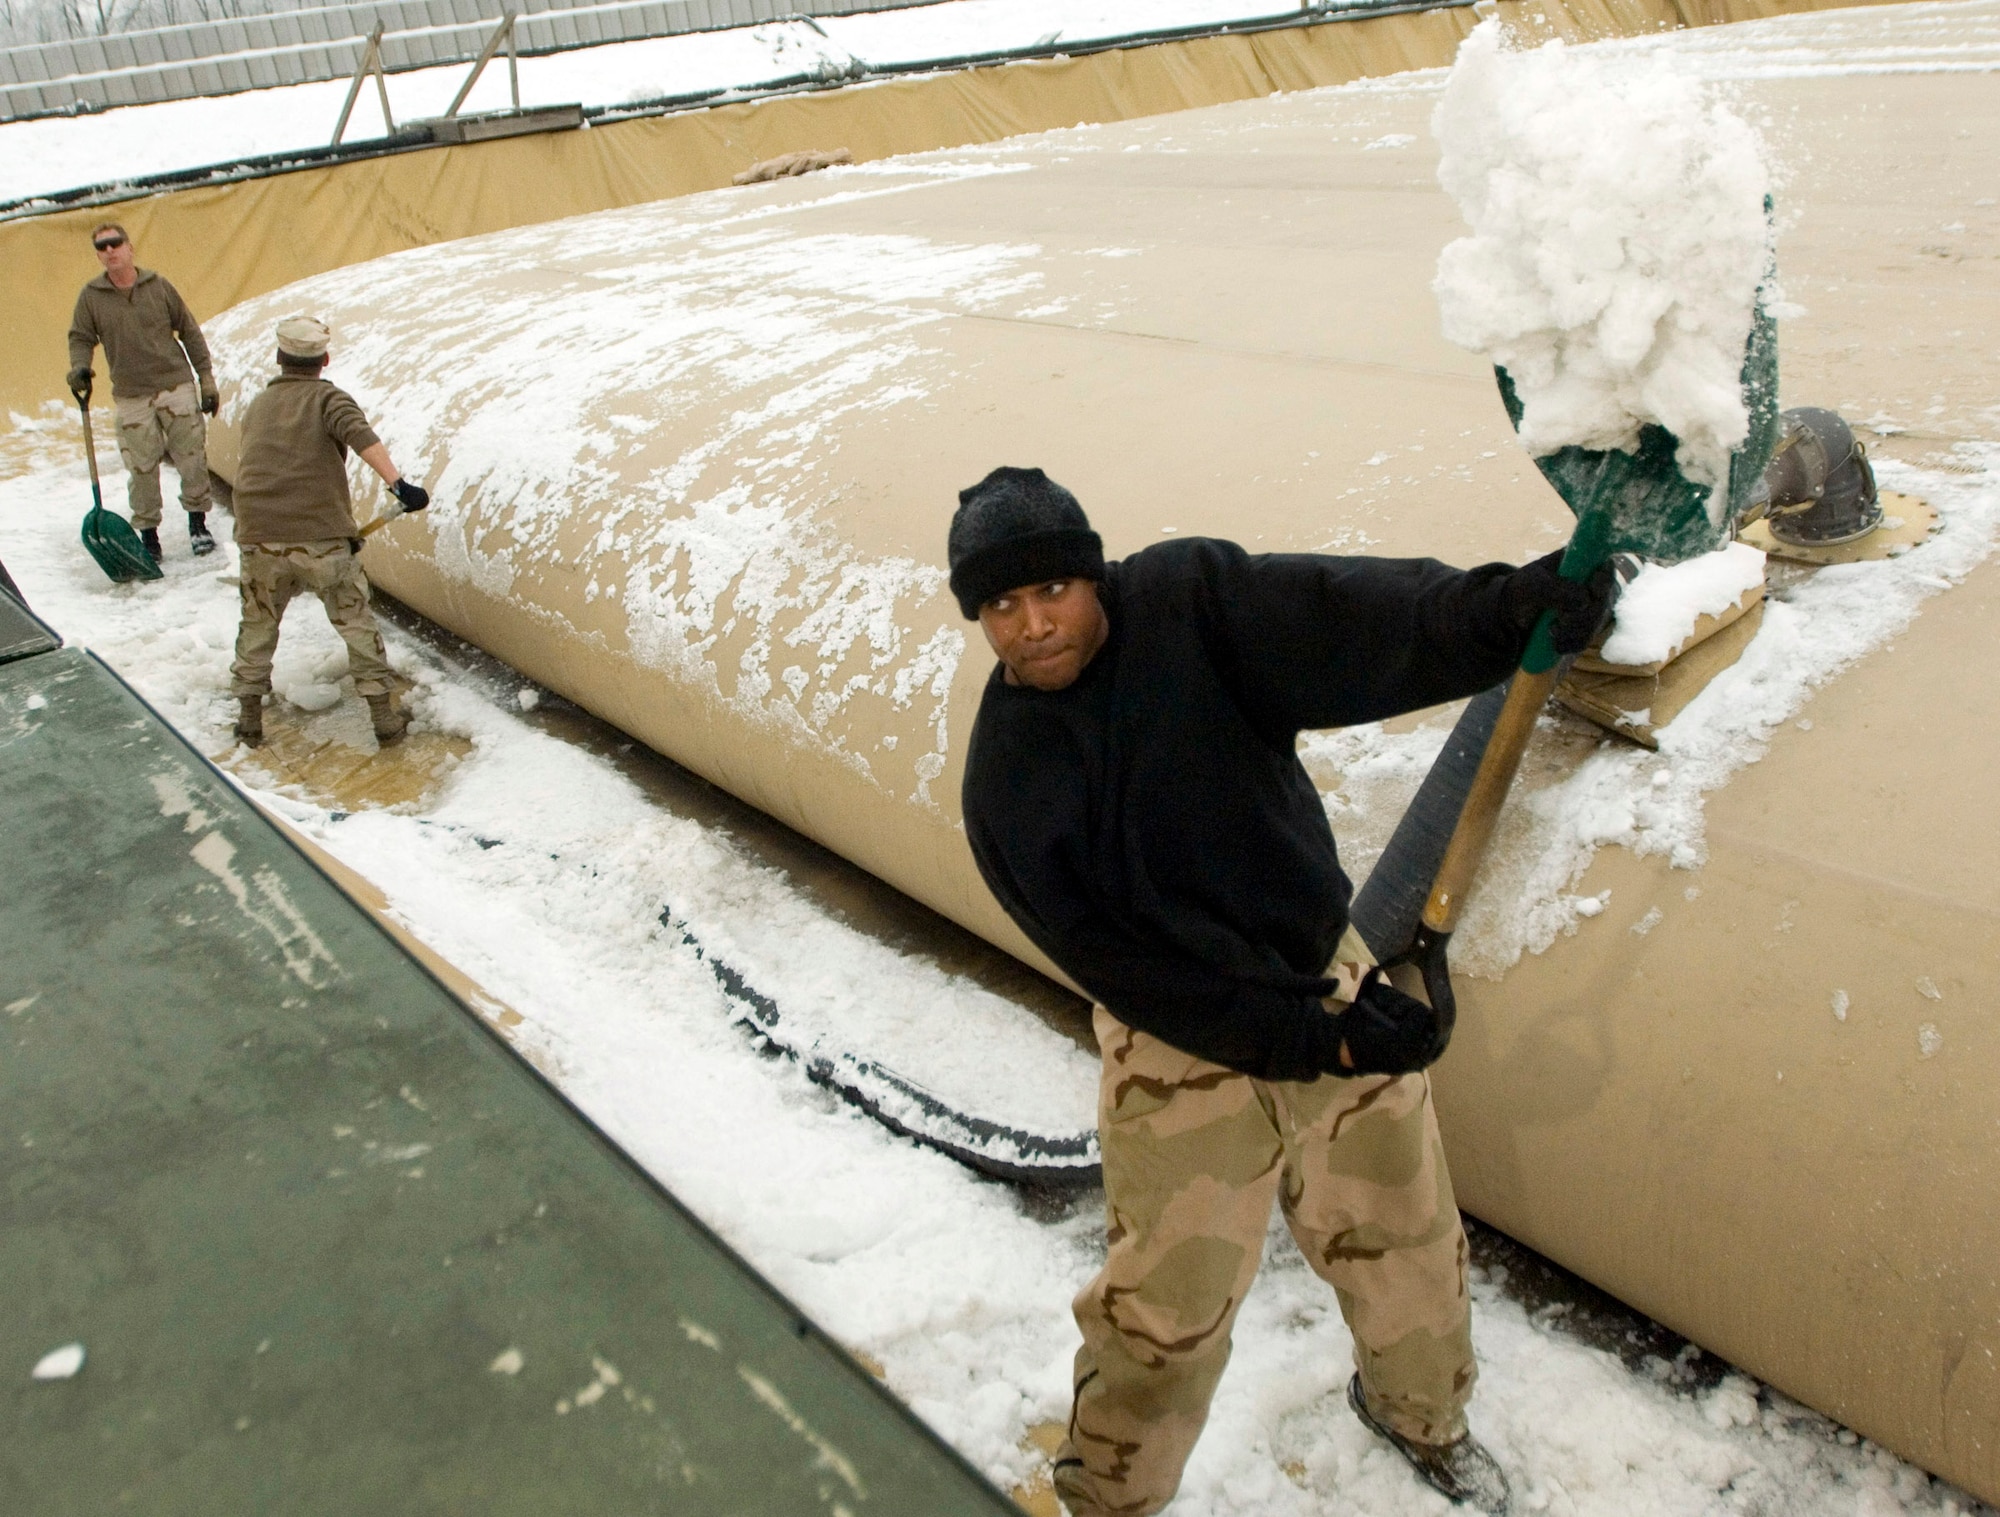 MANAS AIR BASE, Kyrgyzstan (AFPN) -- Staff Sgt. Anderson Matthews shovels snow from around a fuel bladder. The snow must be removed to reduce possible contamination if the bladder ruptures. Sergeant Anderson is a member of the 376th Expeditionary Logistics Squadron's petroleum, oil and lubricants section. He is deployed from Hurlburt Field Fla. (U.S. Air Force photo by Master Sgt. John E. Lasky)